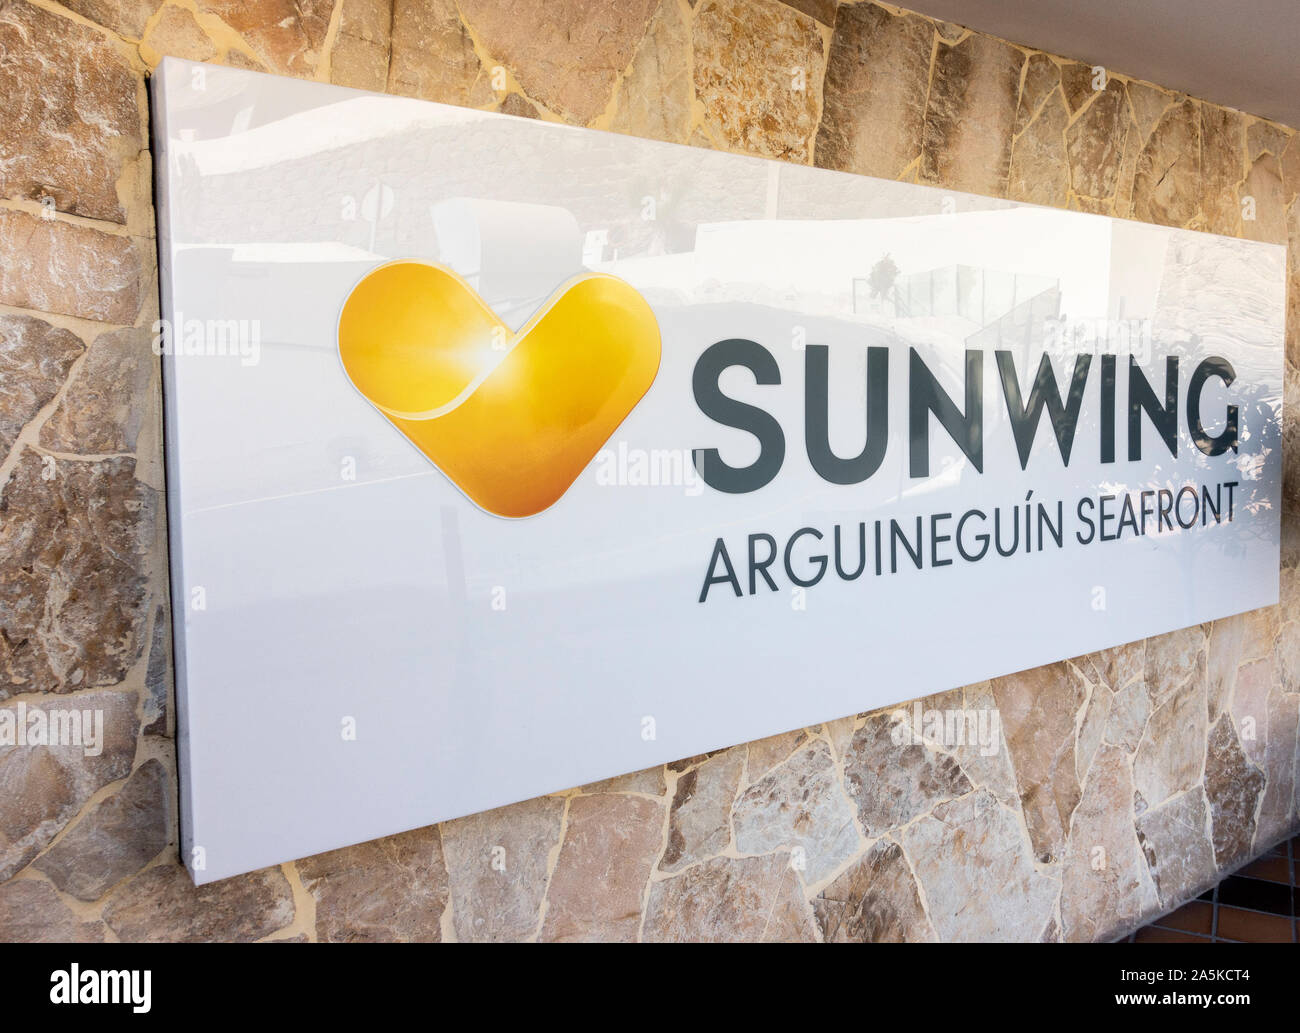 Sunwing Arguineguin hotel. Arguineguin, Gran Canaria, Canary Islands, Spain. The hotel was used by Thomas Cook. Stock Photo